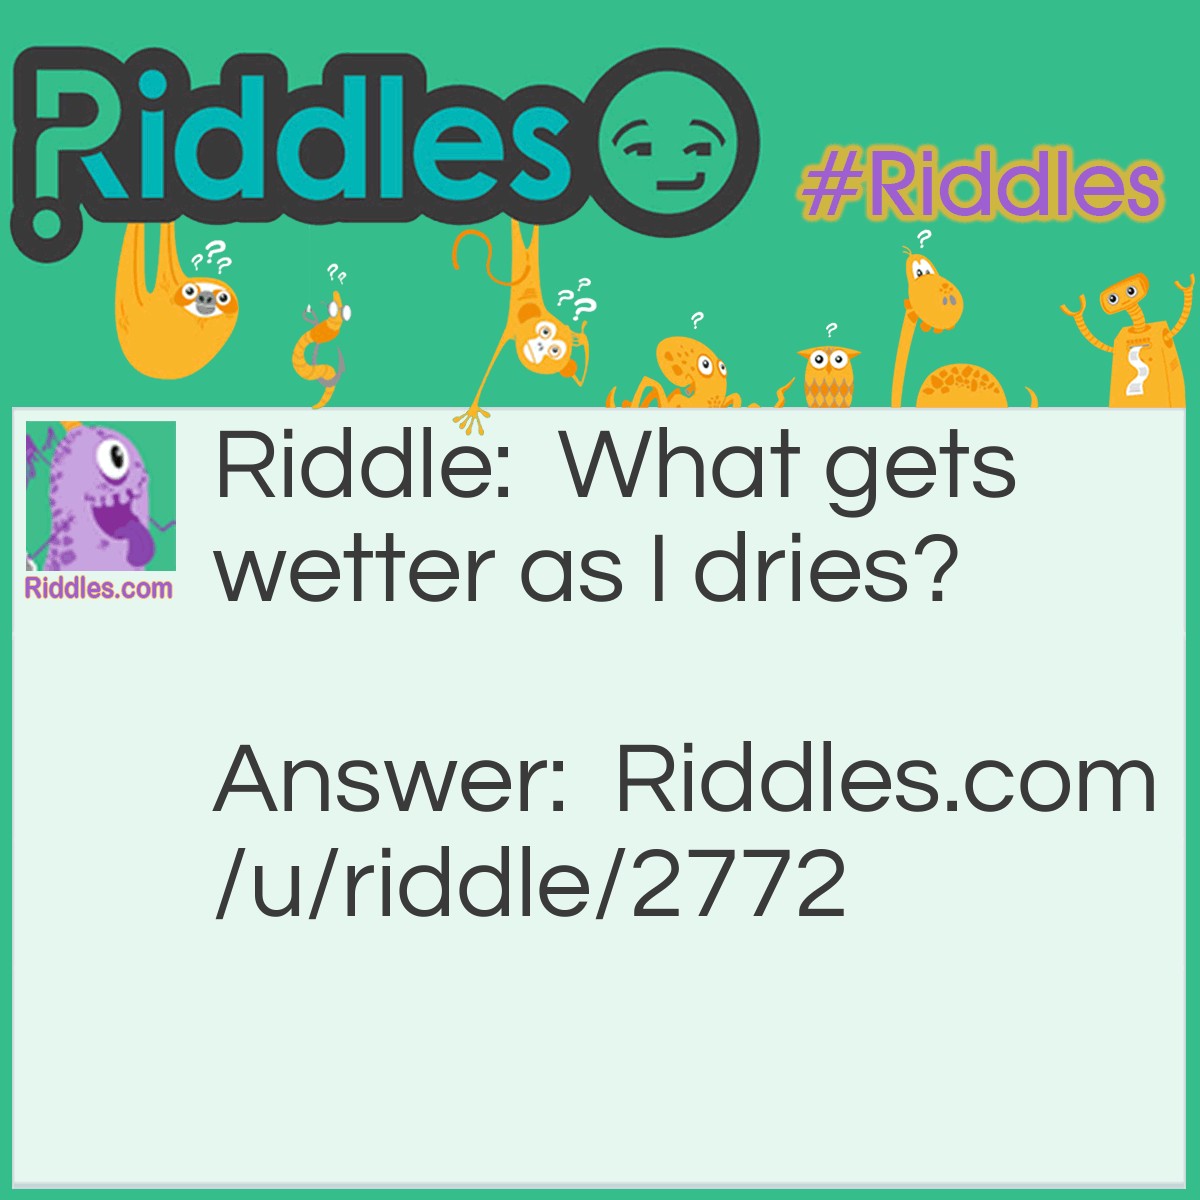 Riddle: What gets wetter as I dries? Answer: A towel.